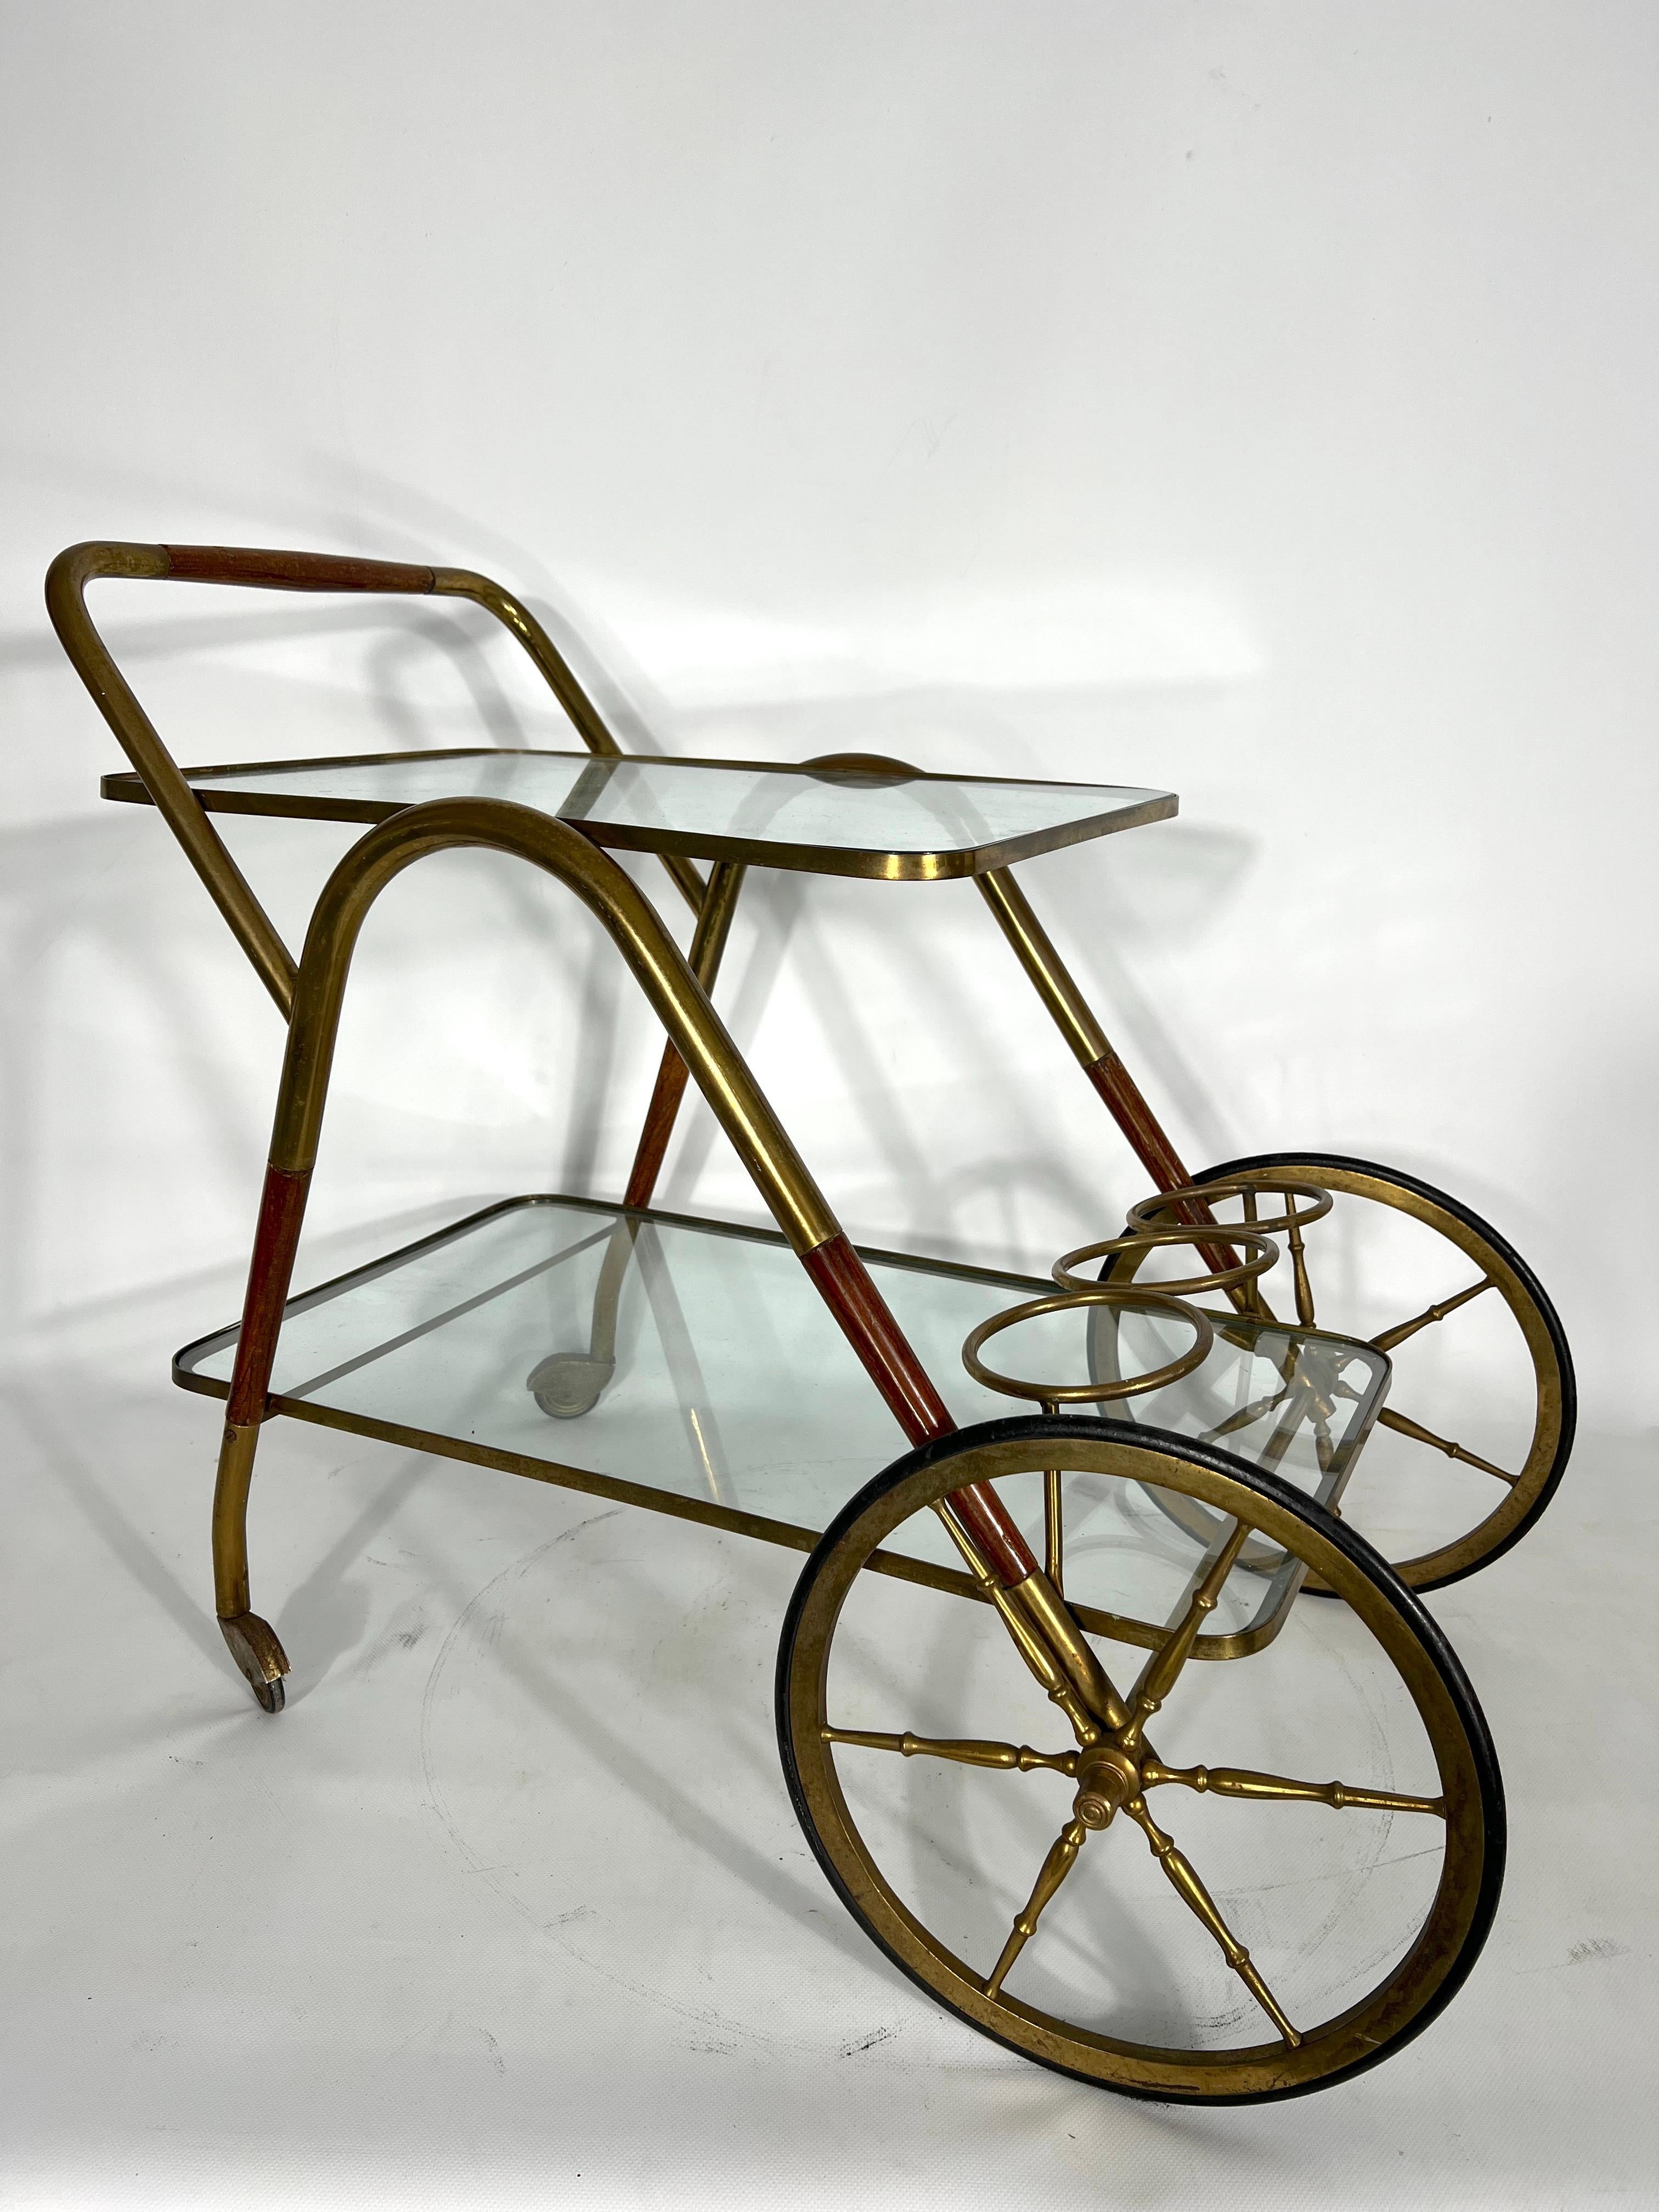 Good vintage condition with trace of age and use for this trolley or bar cart designed by Cesare Lacca and produced in Italy during the 50s. It is made from wood, brass and clear glass.